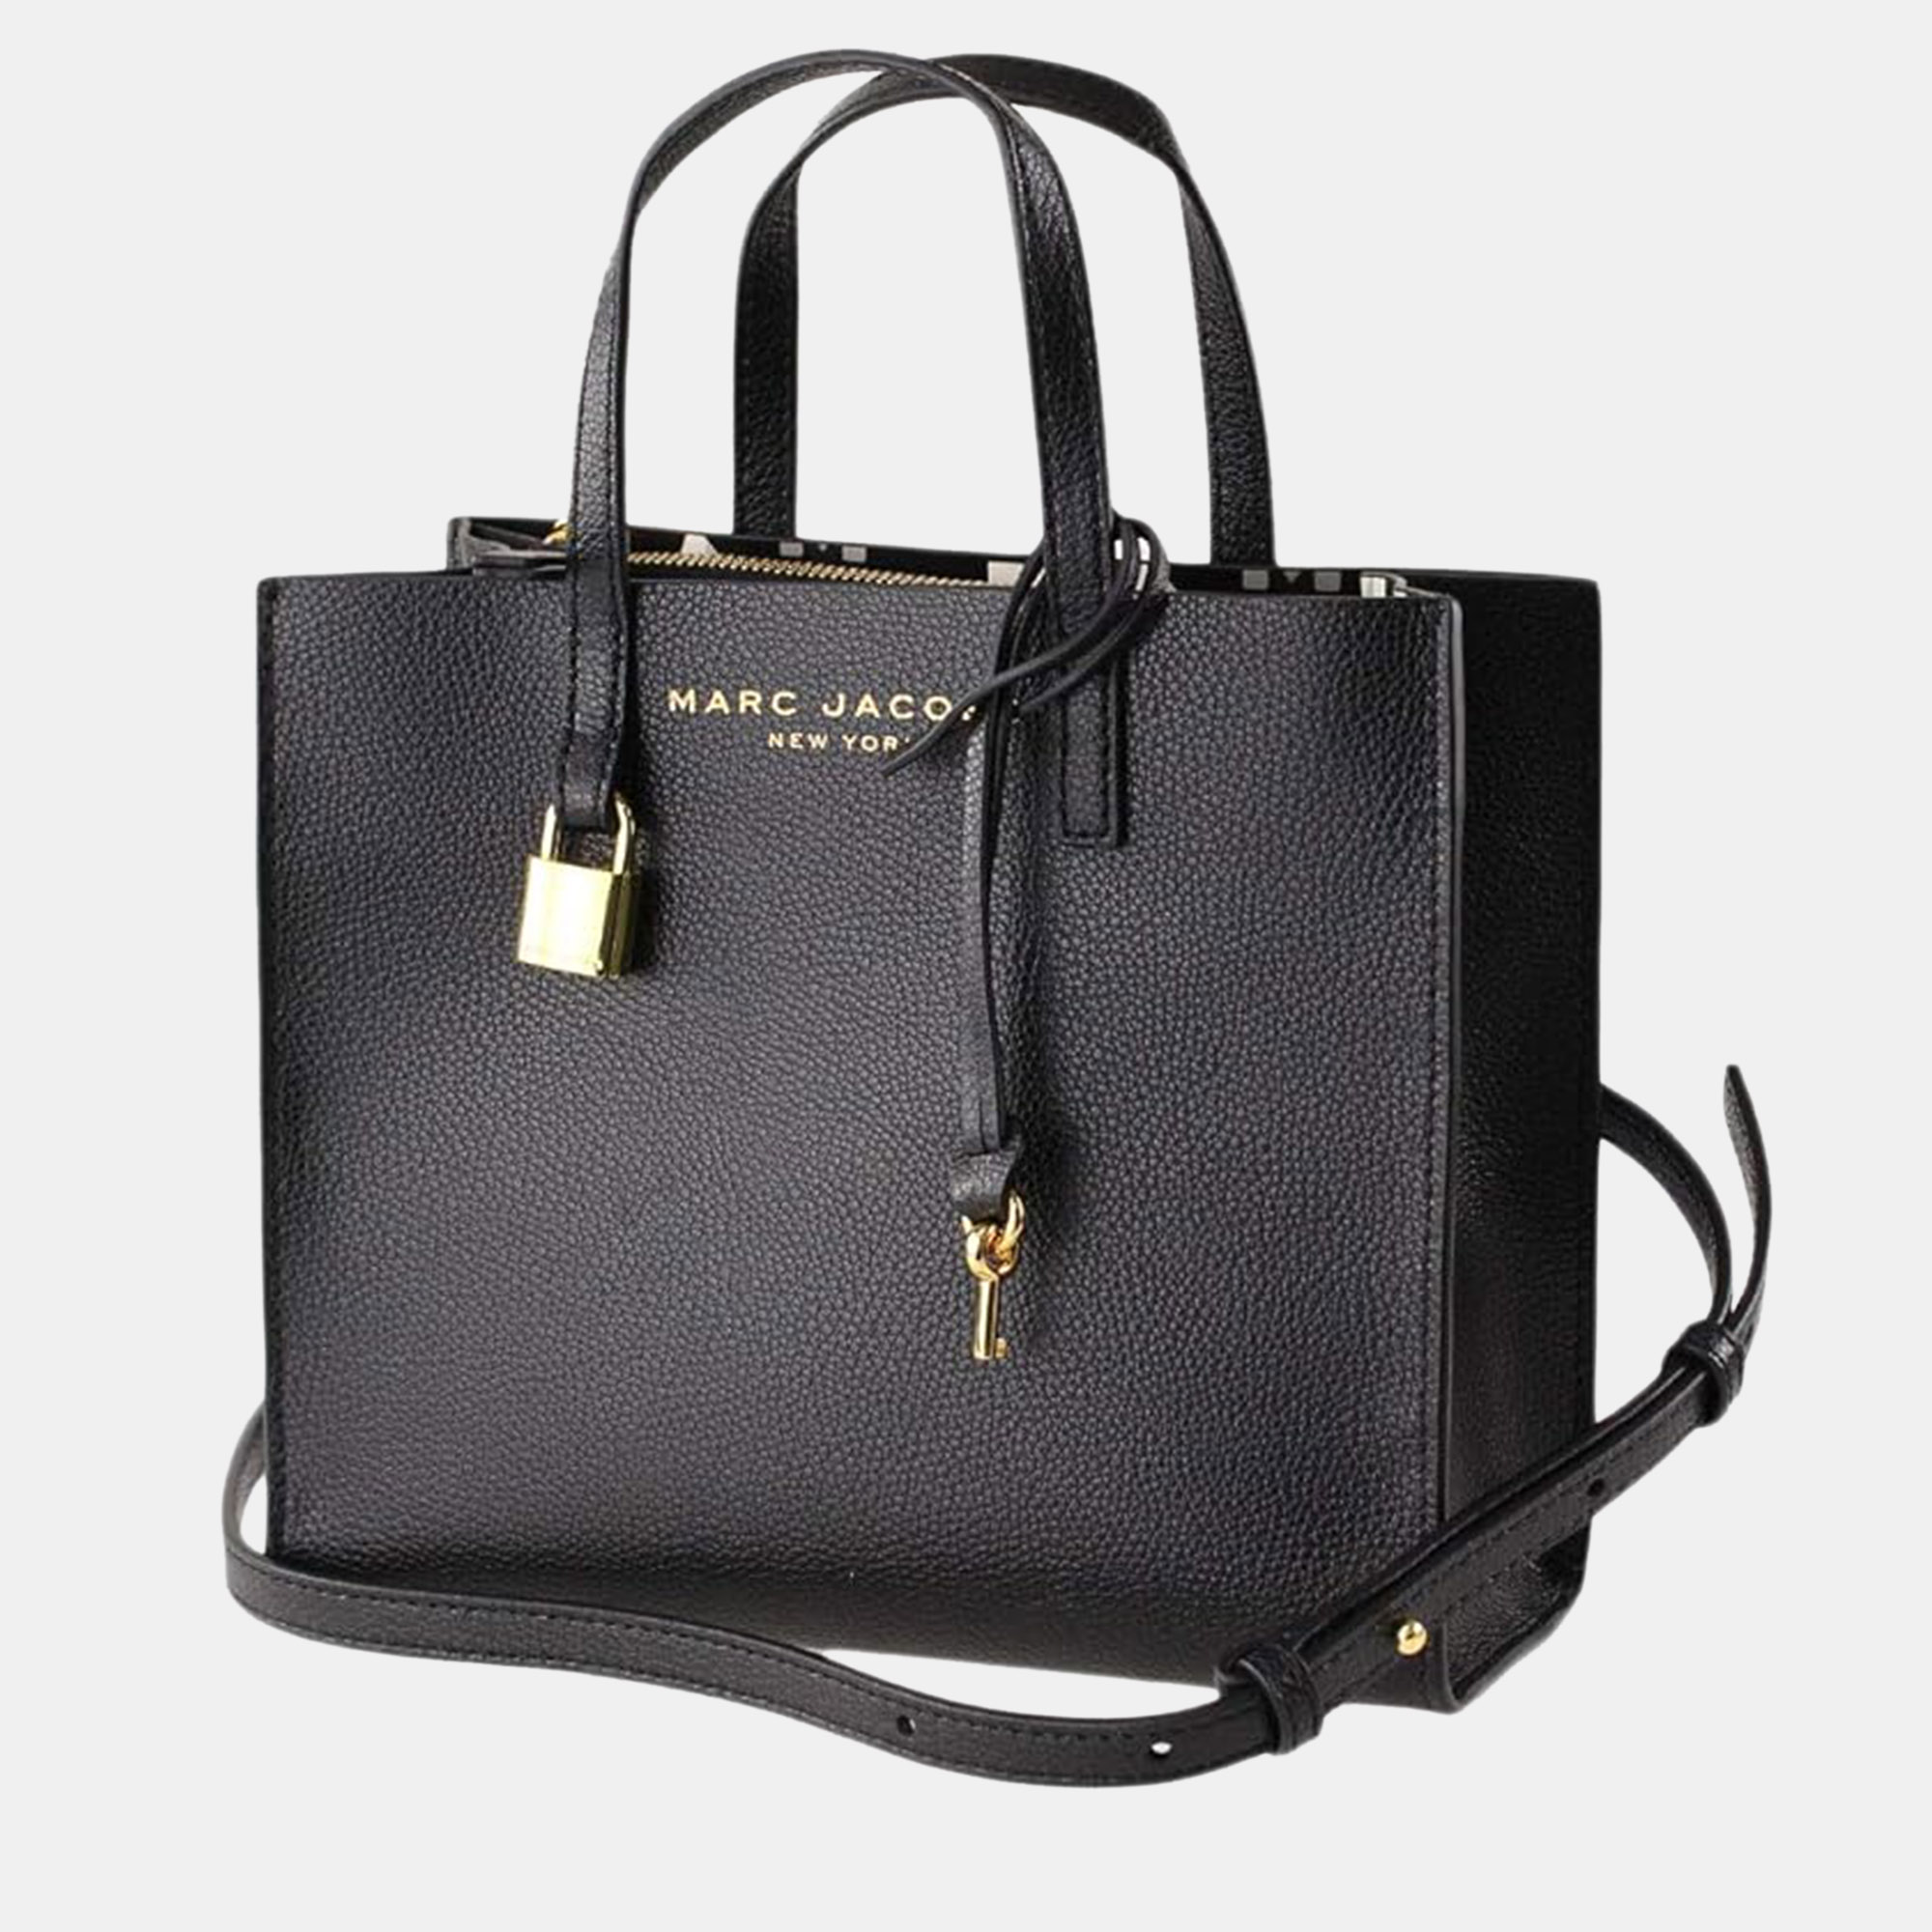 Marc Jacobs Mint Leather Tote